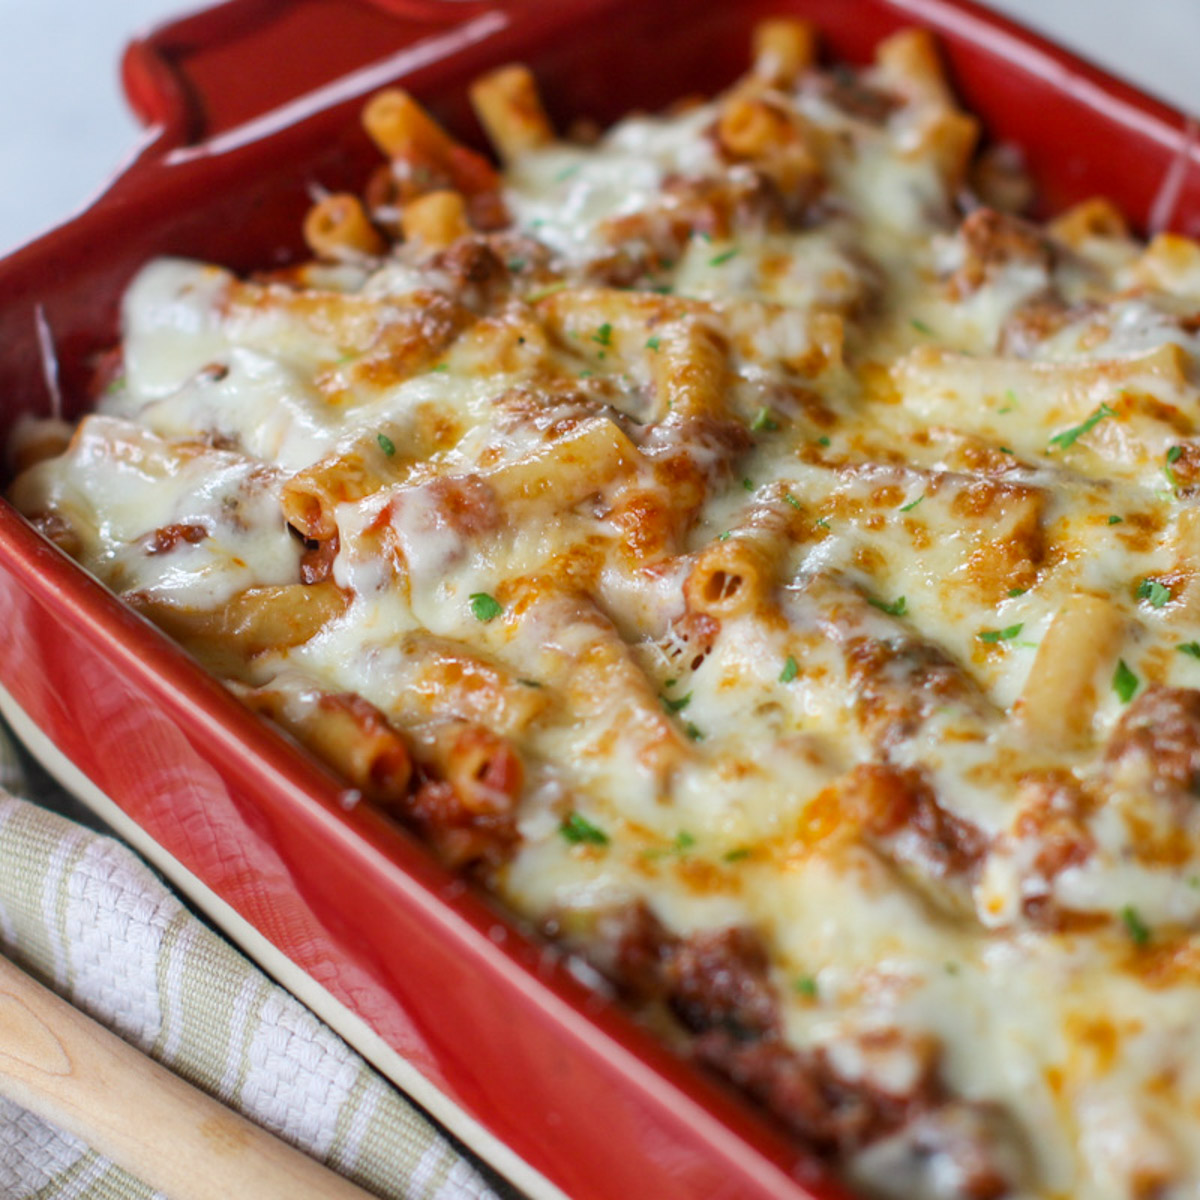 A red baking dish of ziti pasta in a marinara beef ragu sauce baked with melted white cheese.